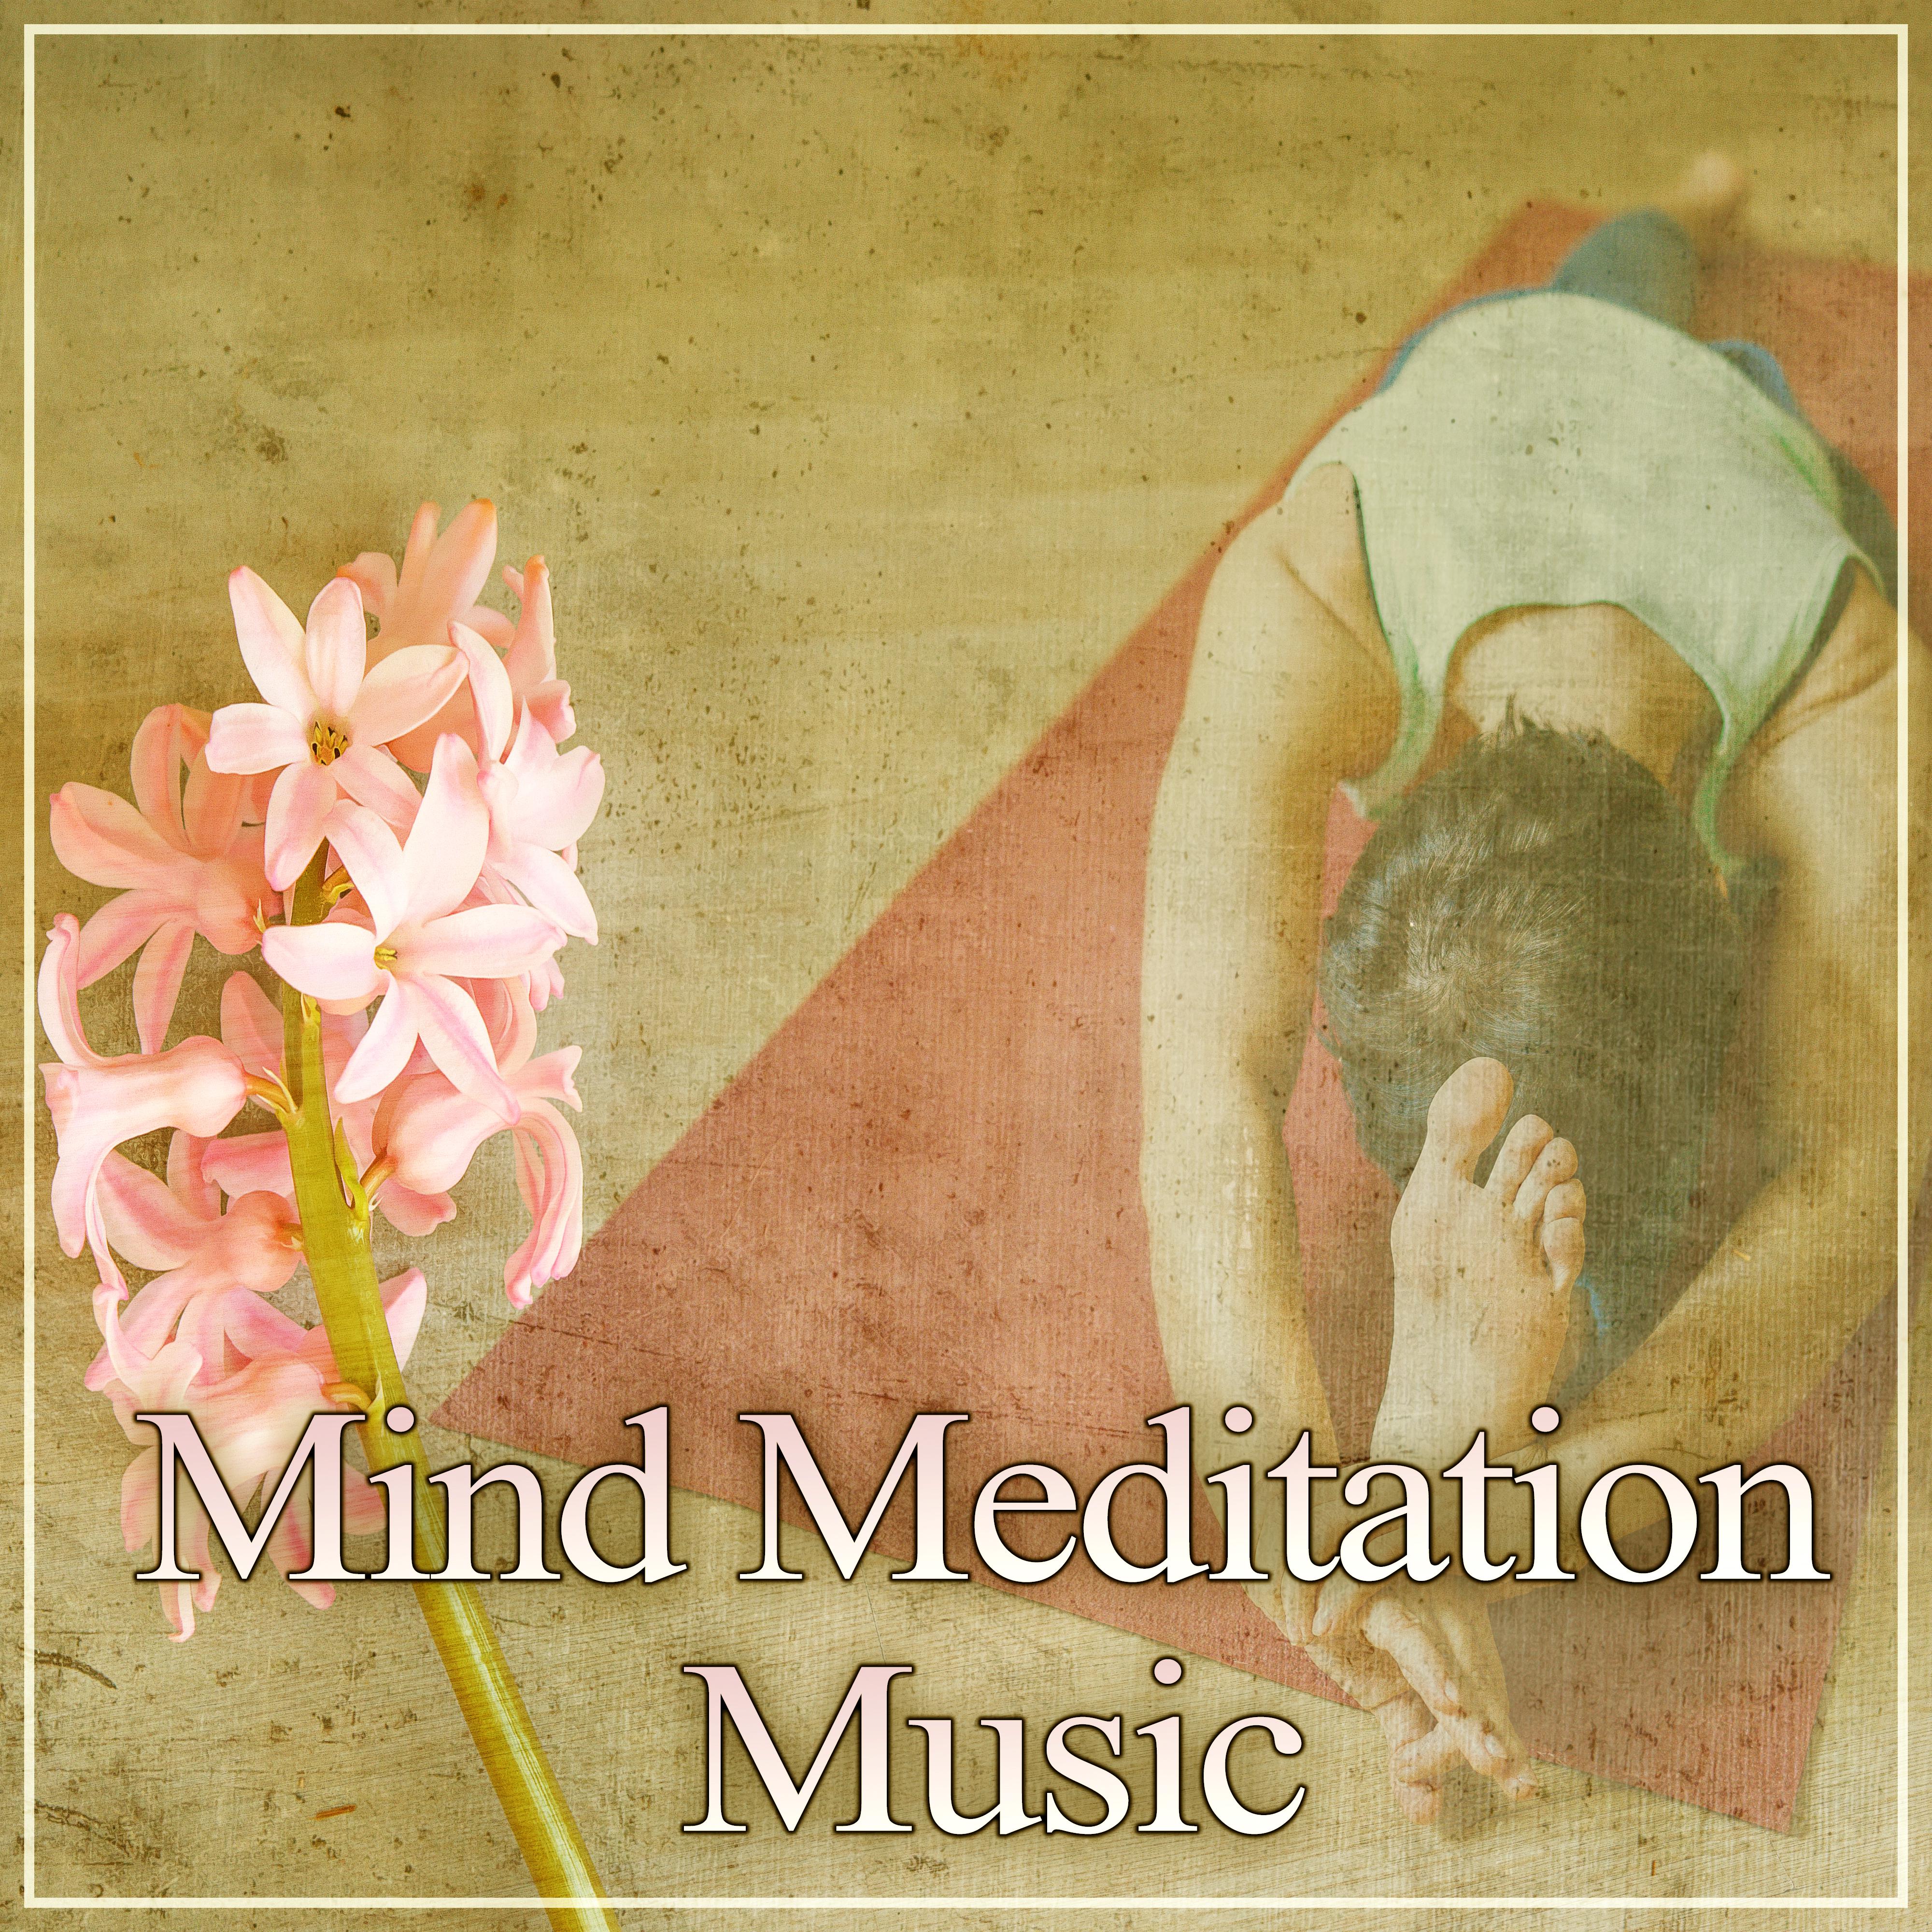 Mind Meditation Music  New Age Music for Relaxation, Feel Pure Mind with Healing Music, Calmness, Mindfulness Meditation